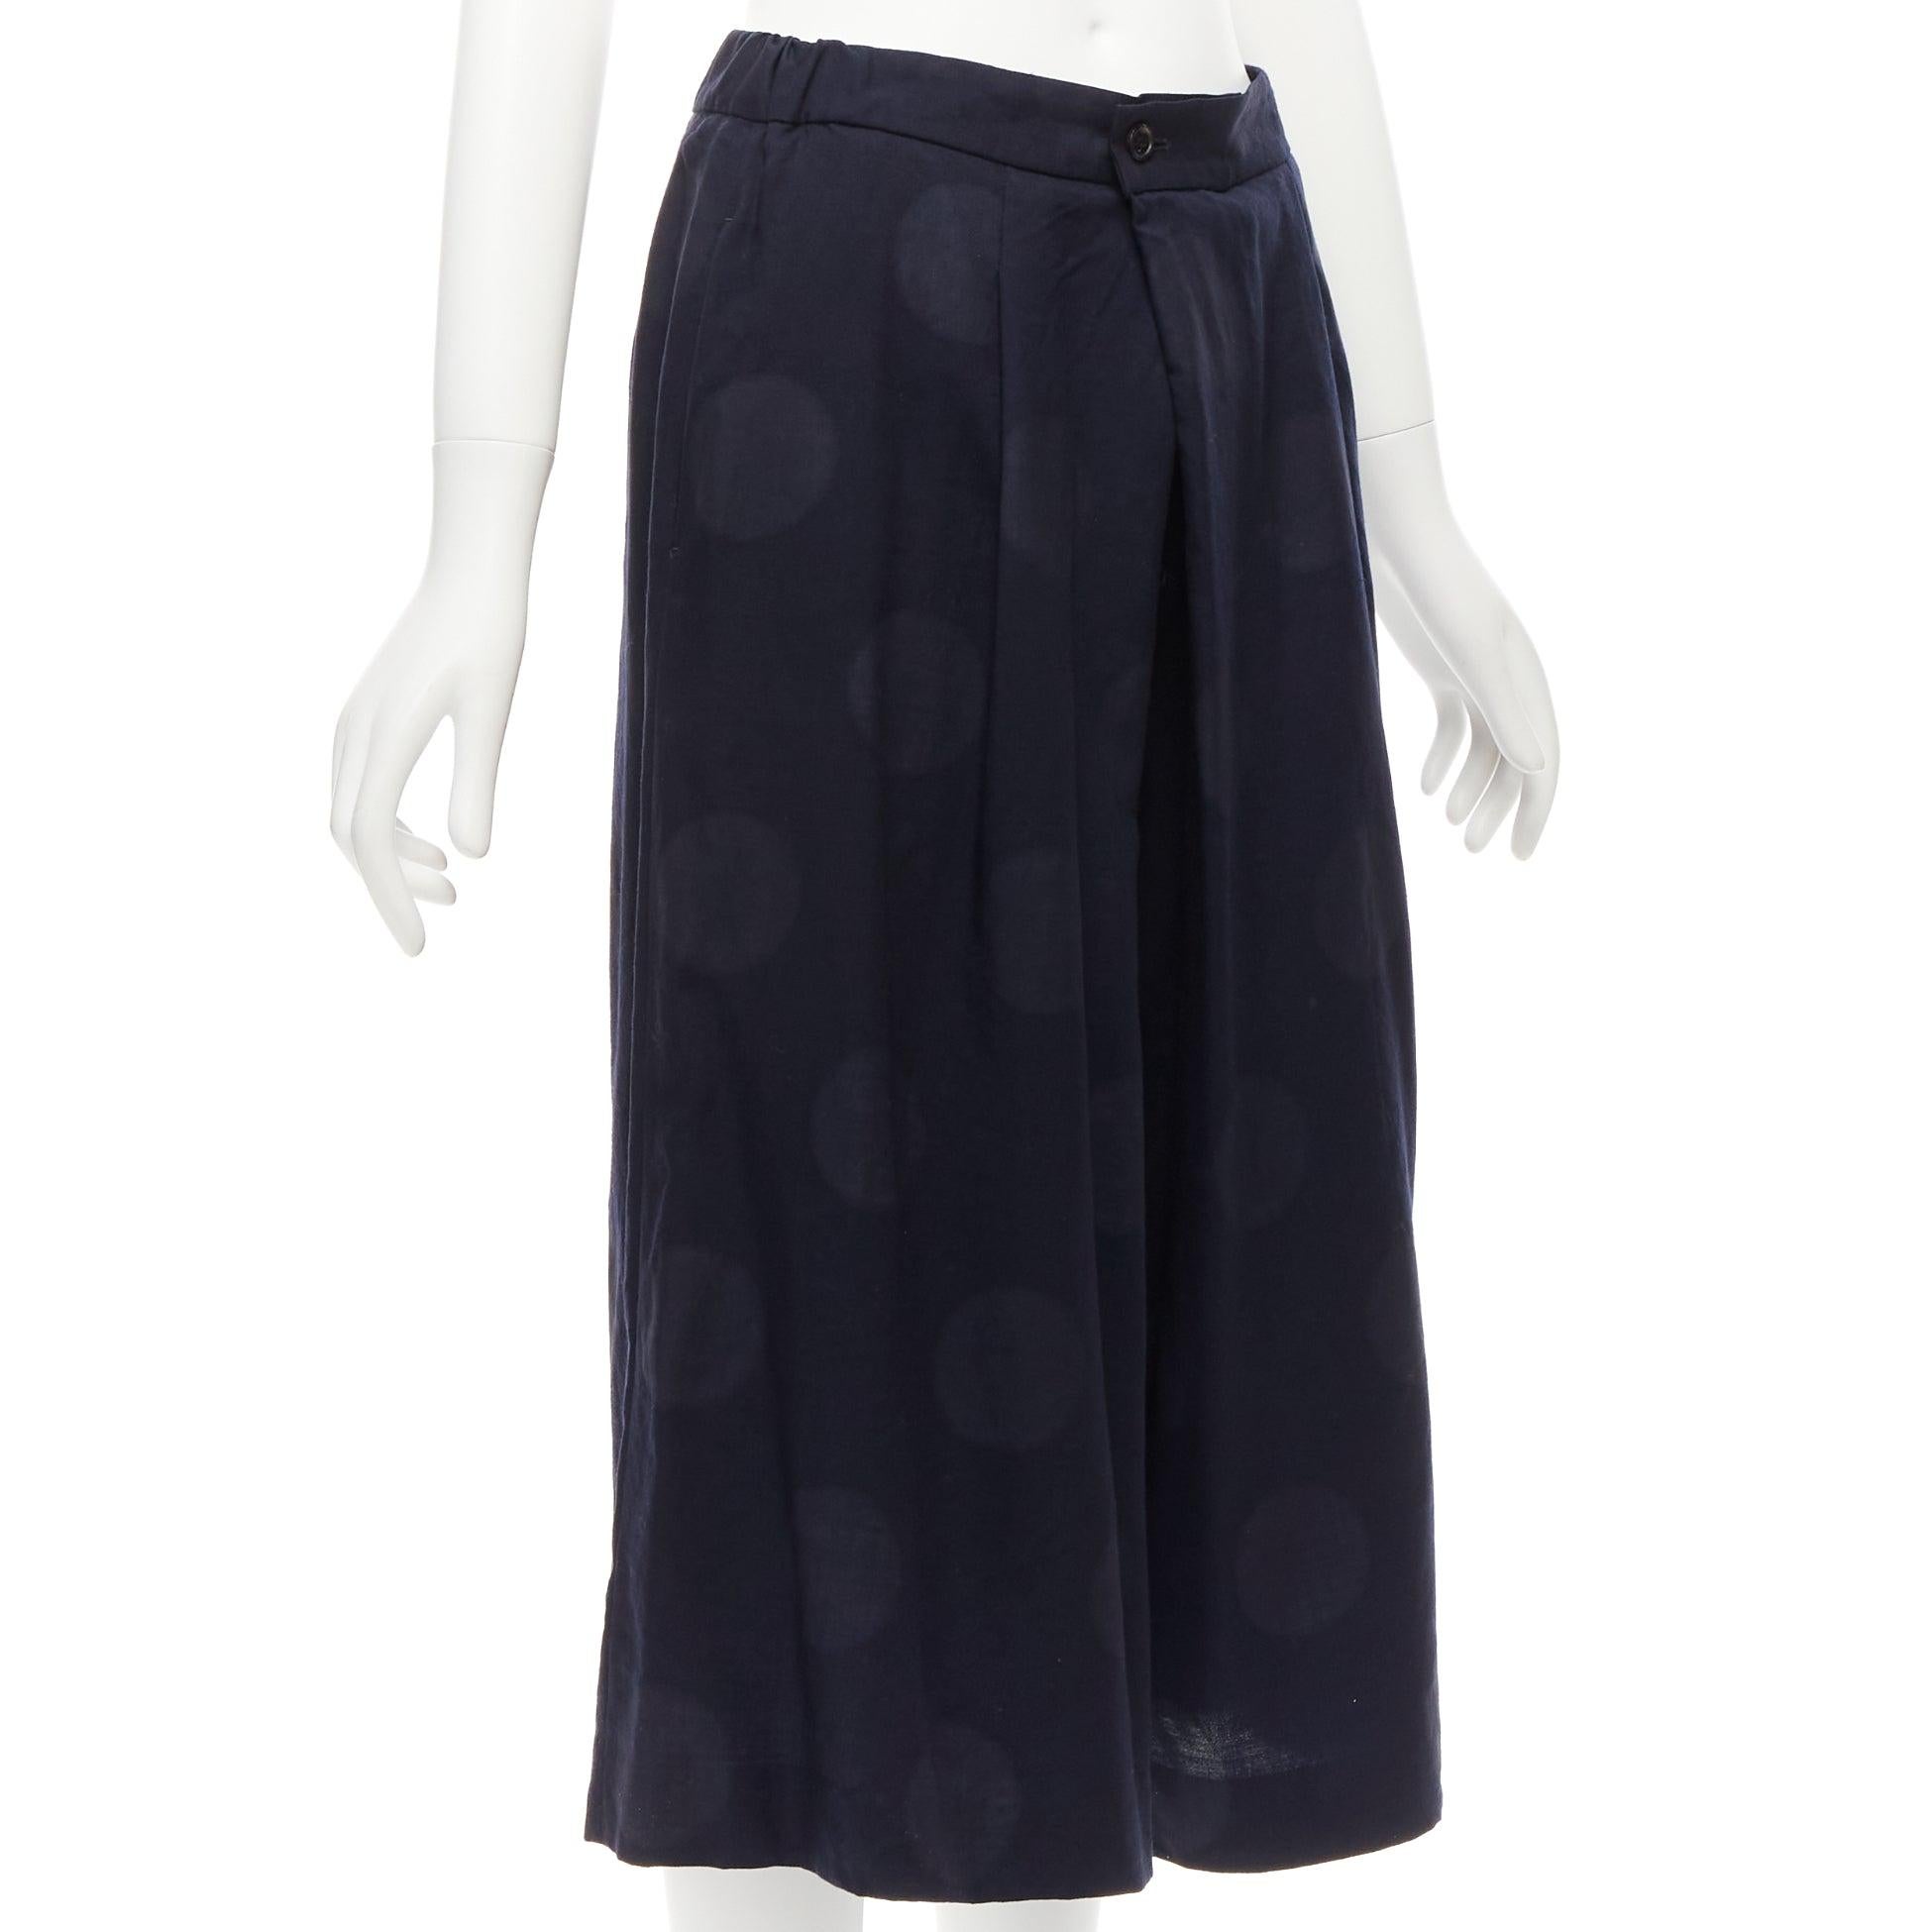 Y'S YOHJI YAMAMOTO Exclusive navy wool polka dots pleated wide pants IT38 XS
Reference: JACG/A00106
Brand: Y's Yohji Yamamoto
Collection: Y's Exclusive
Material: Wool
Color: Navy
Pattern: Polka Dot
Closure: Zip Fly
Lining: Navy Fabric
Extra Details: